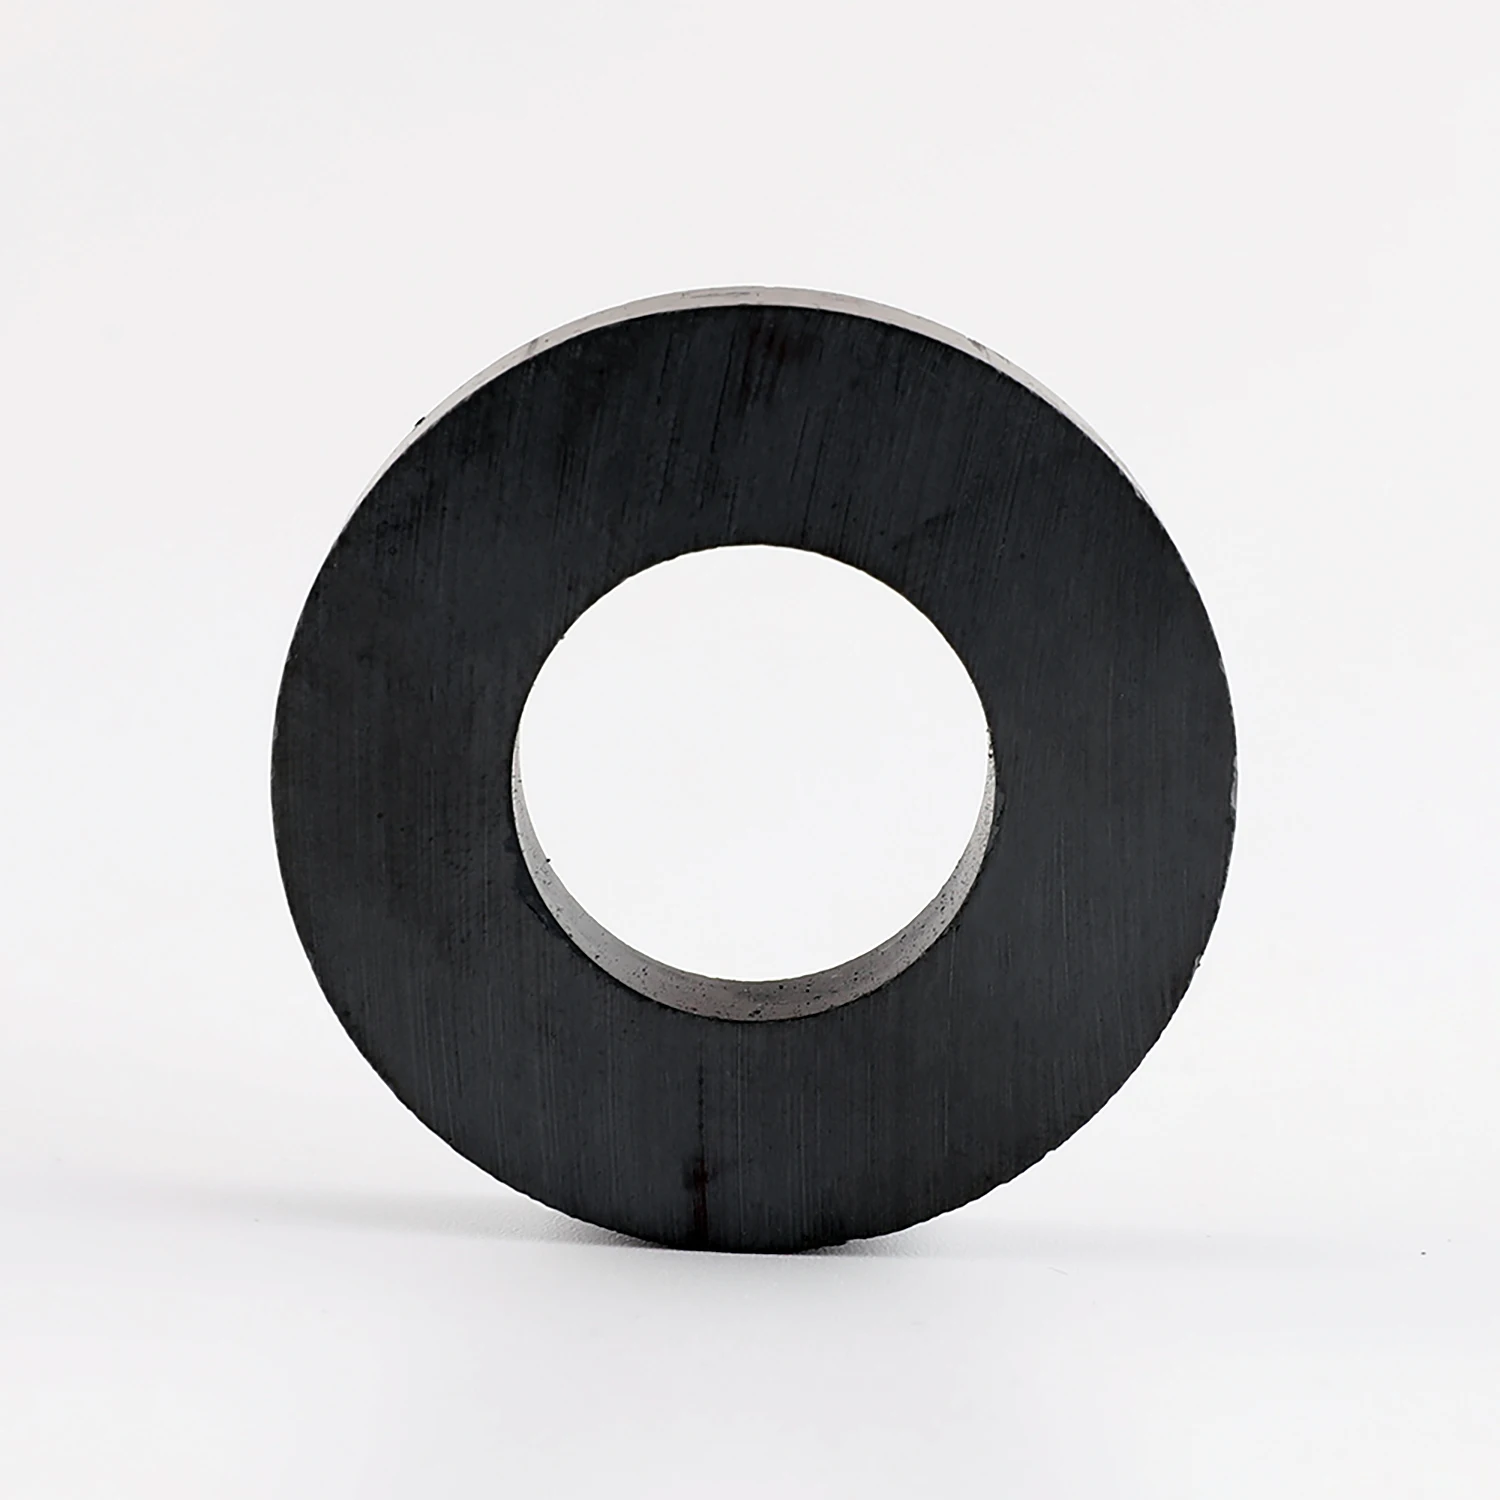 Strong Magnetic Power Permanent Super Ring Customized Ferrite Y25-Y40 magnet